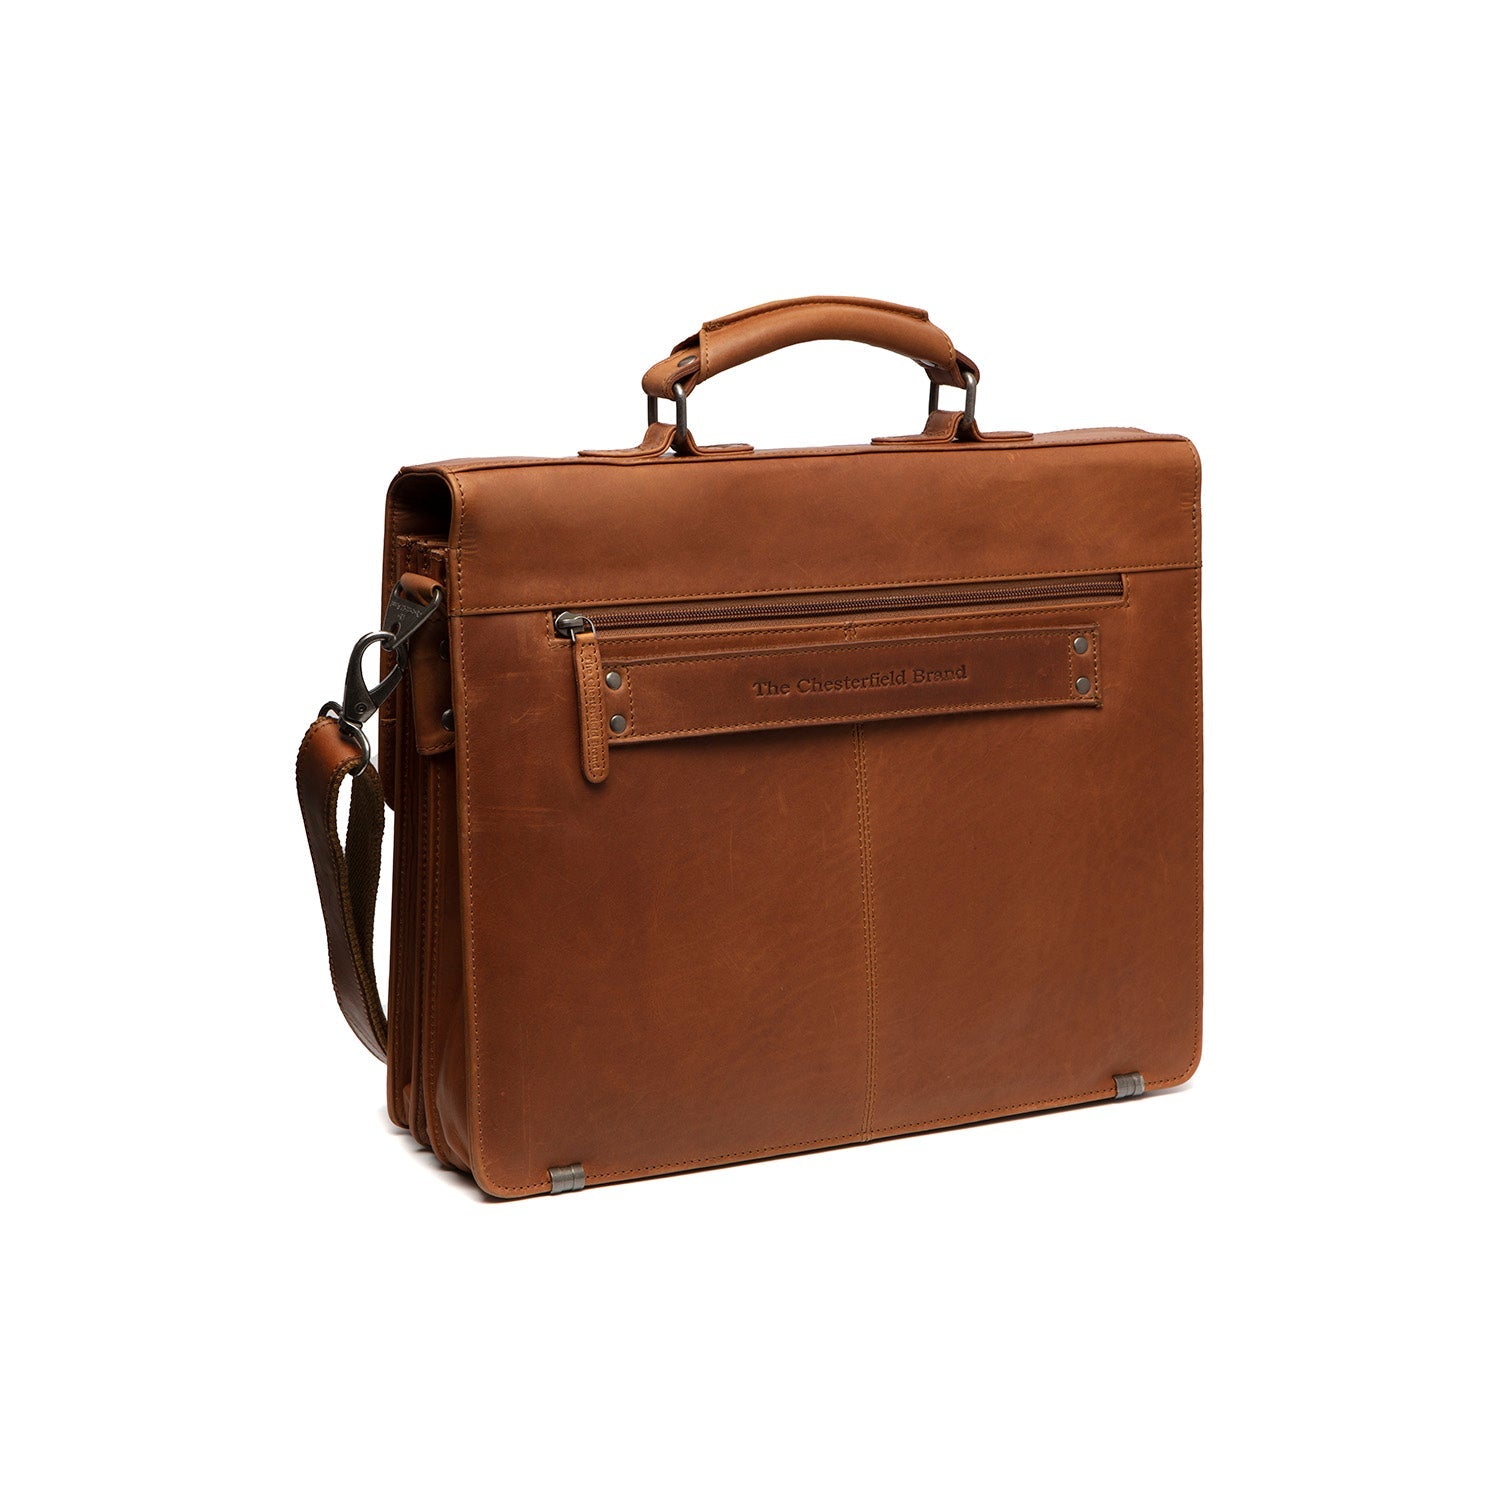 Leather Briefcase - The Chesterfield Brand Springfield Cognac